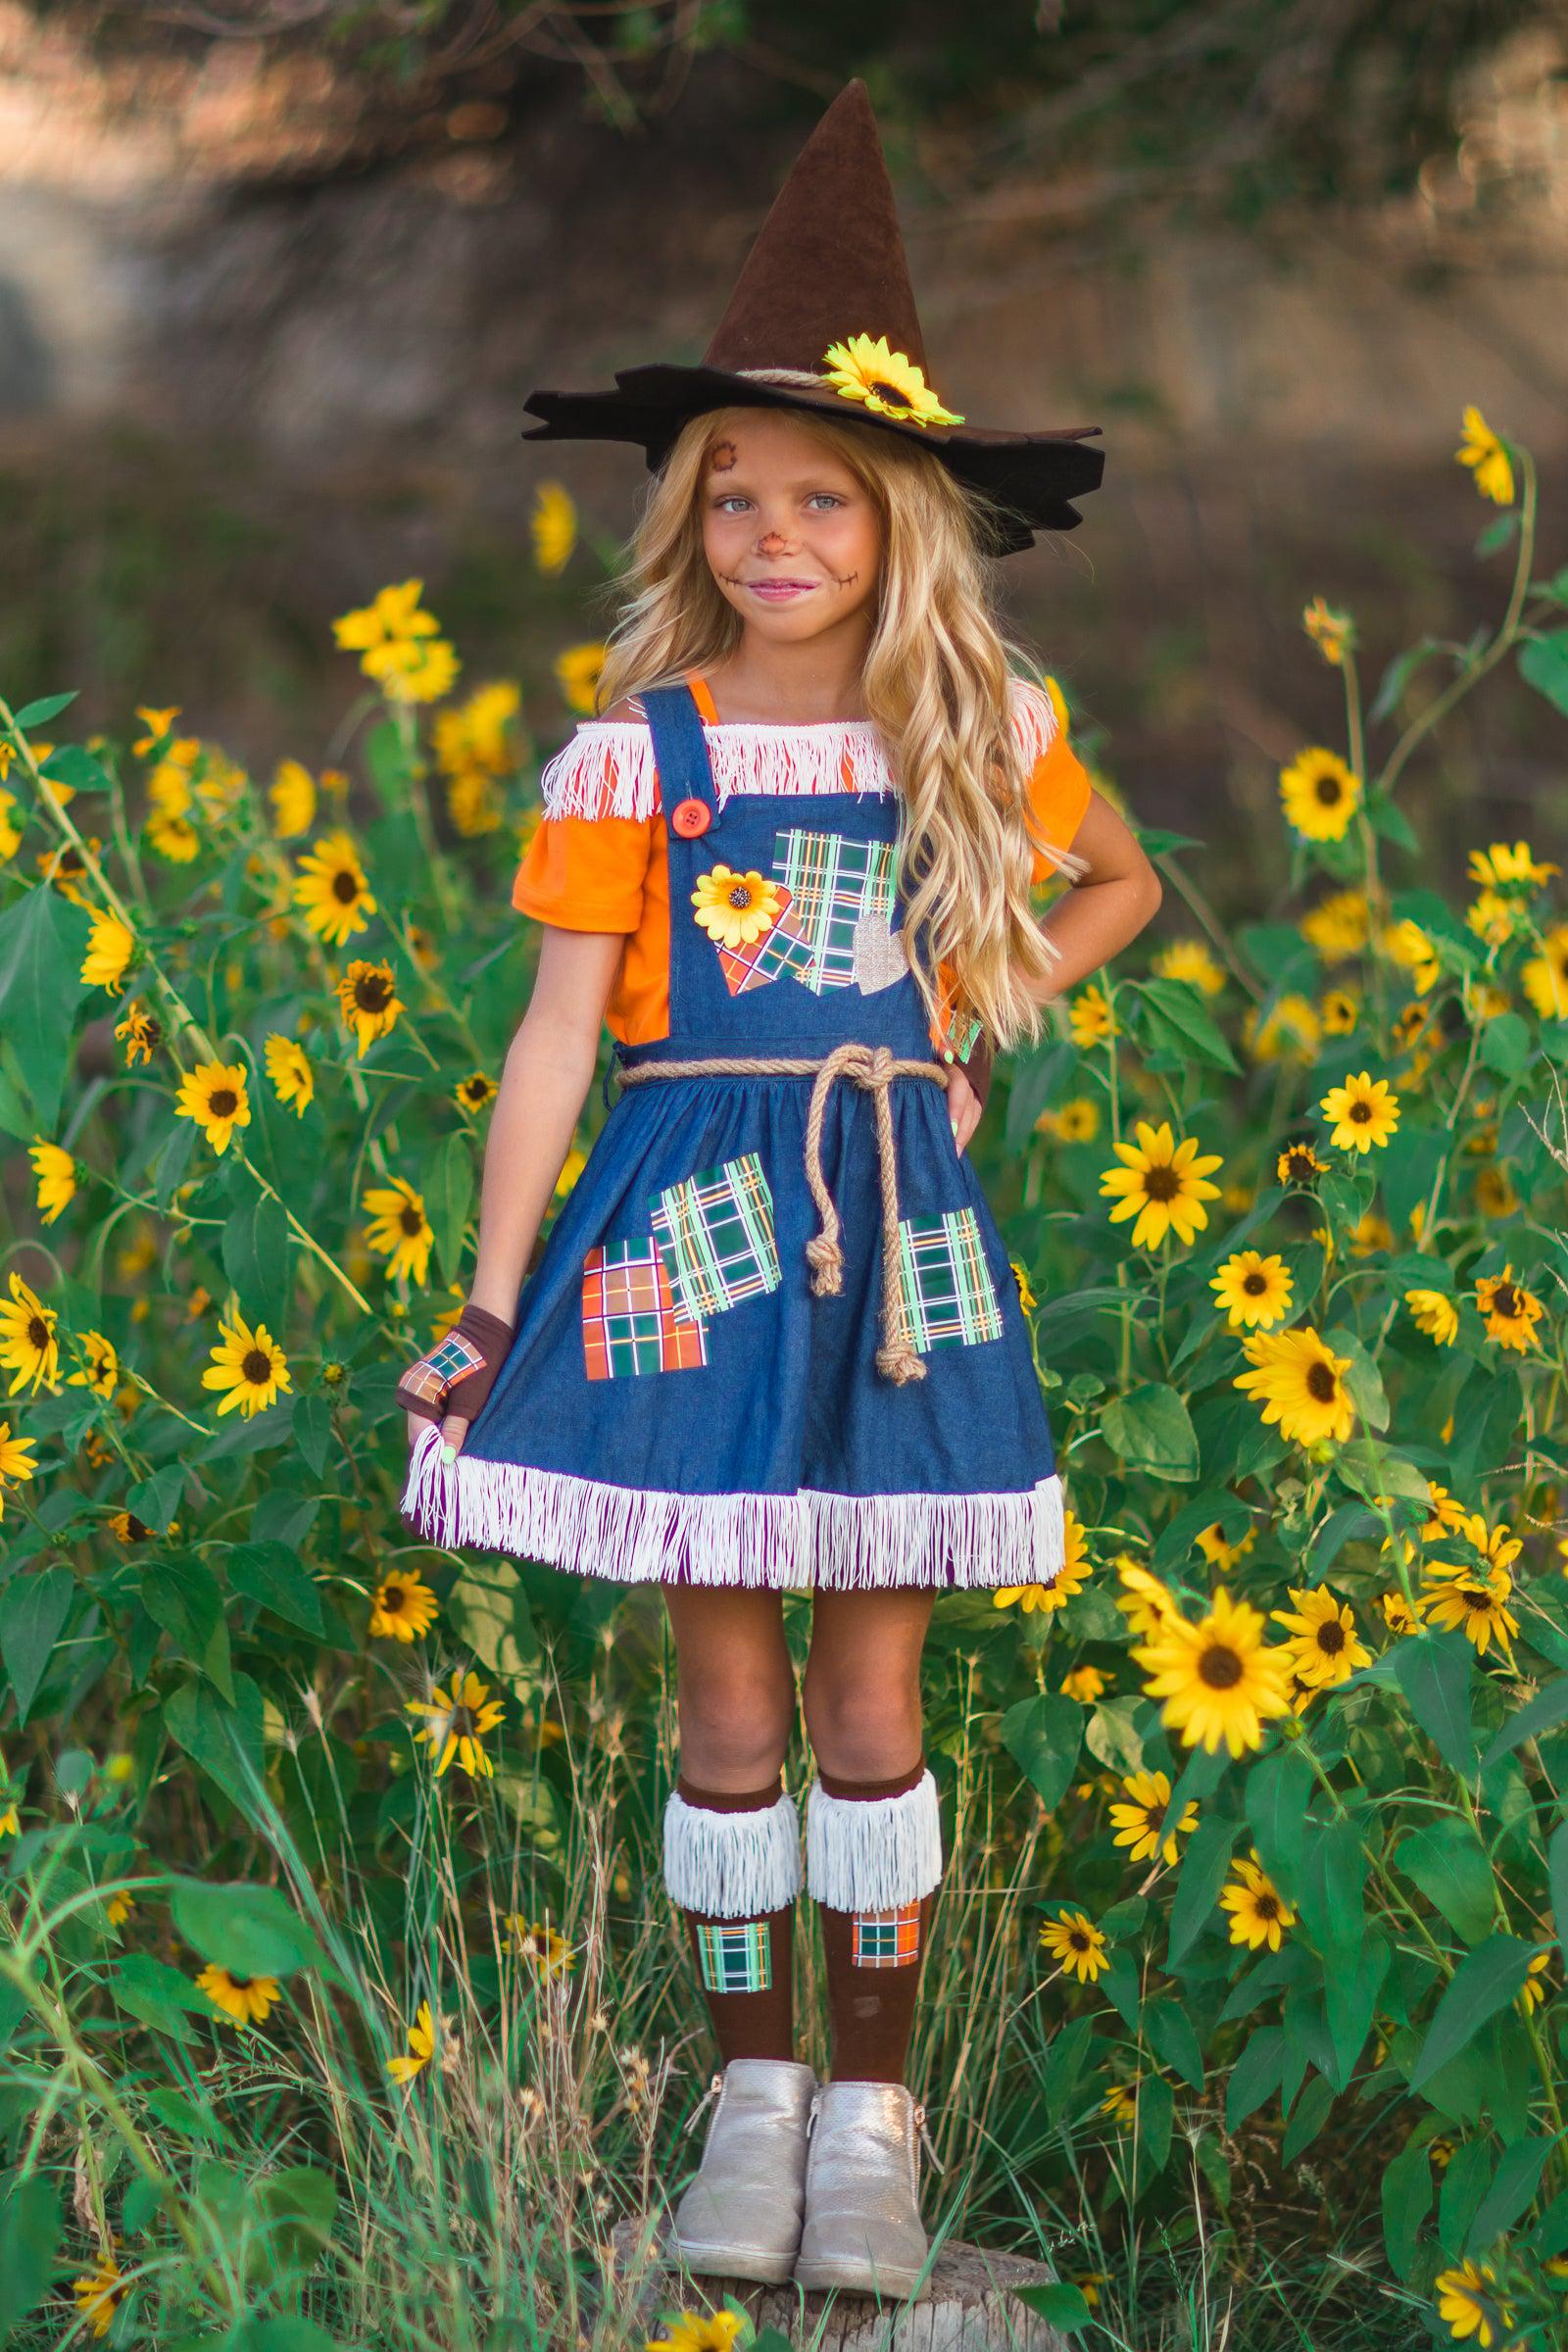 cute scarecrow makeup for girls